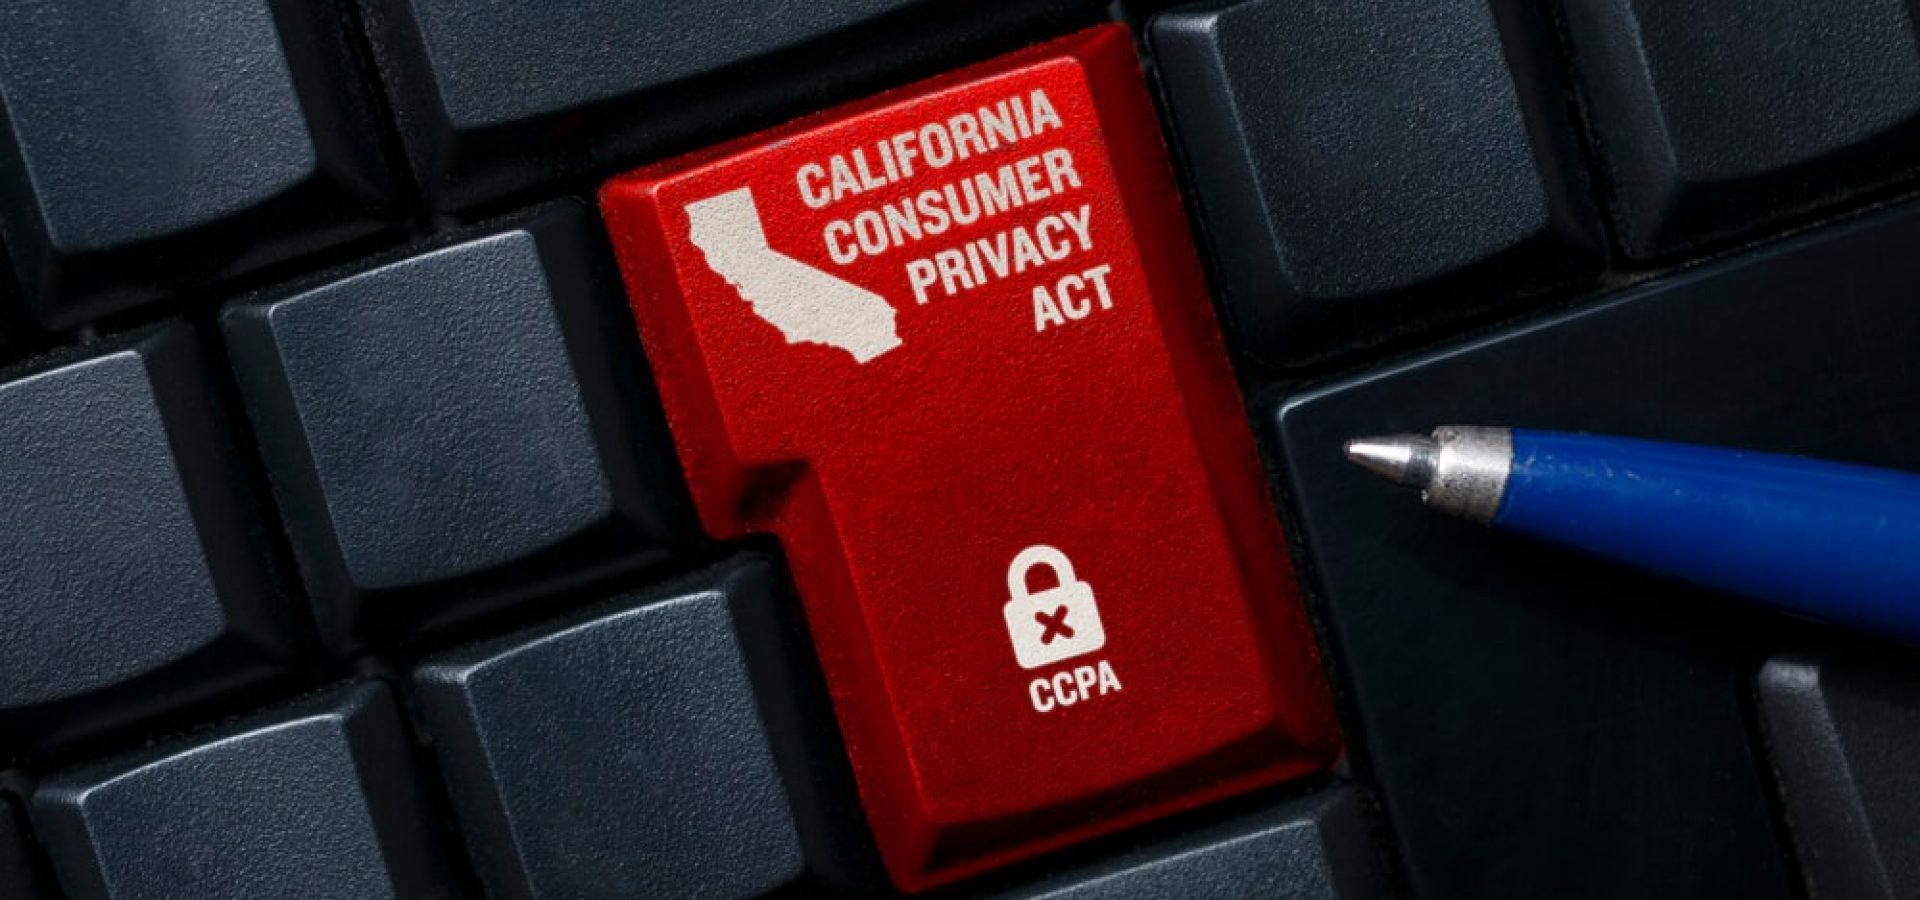 Consumer Privacy: a black compu ter keyboard with a lock, a California shape and the text California consumer privacy act